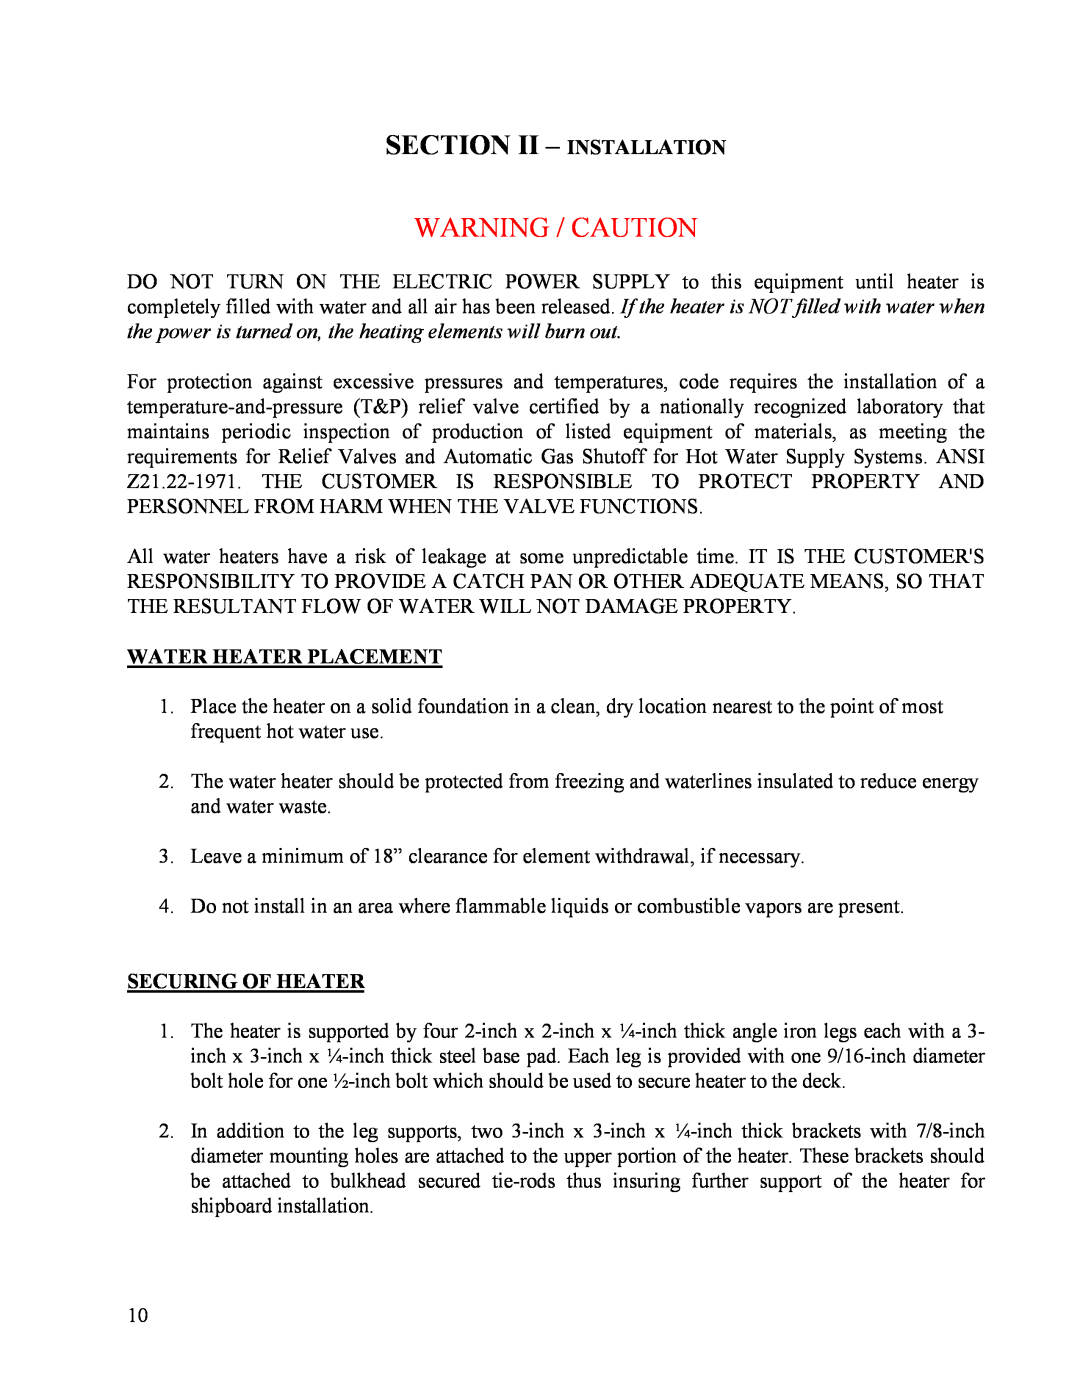 Hubbell Electric Heater Company MSE manual Warning / Caution, Water Heater Placement, Securing Of Heater 